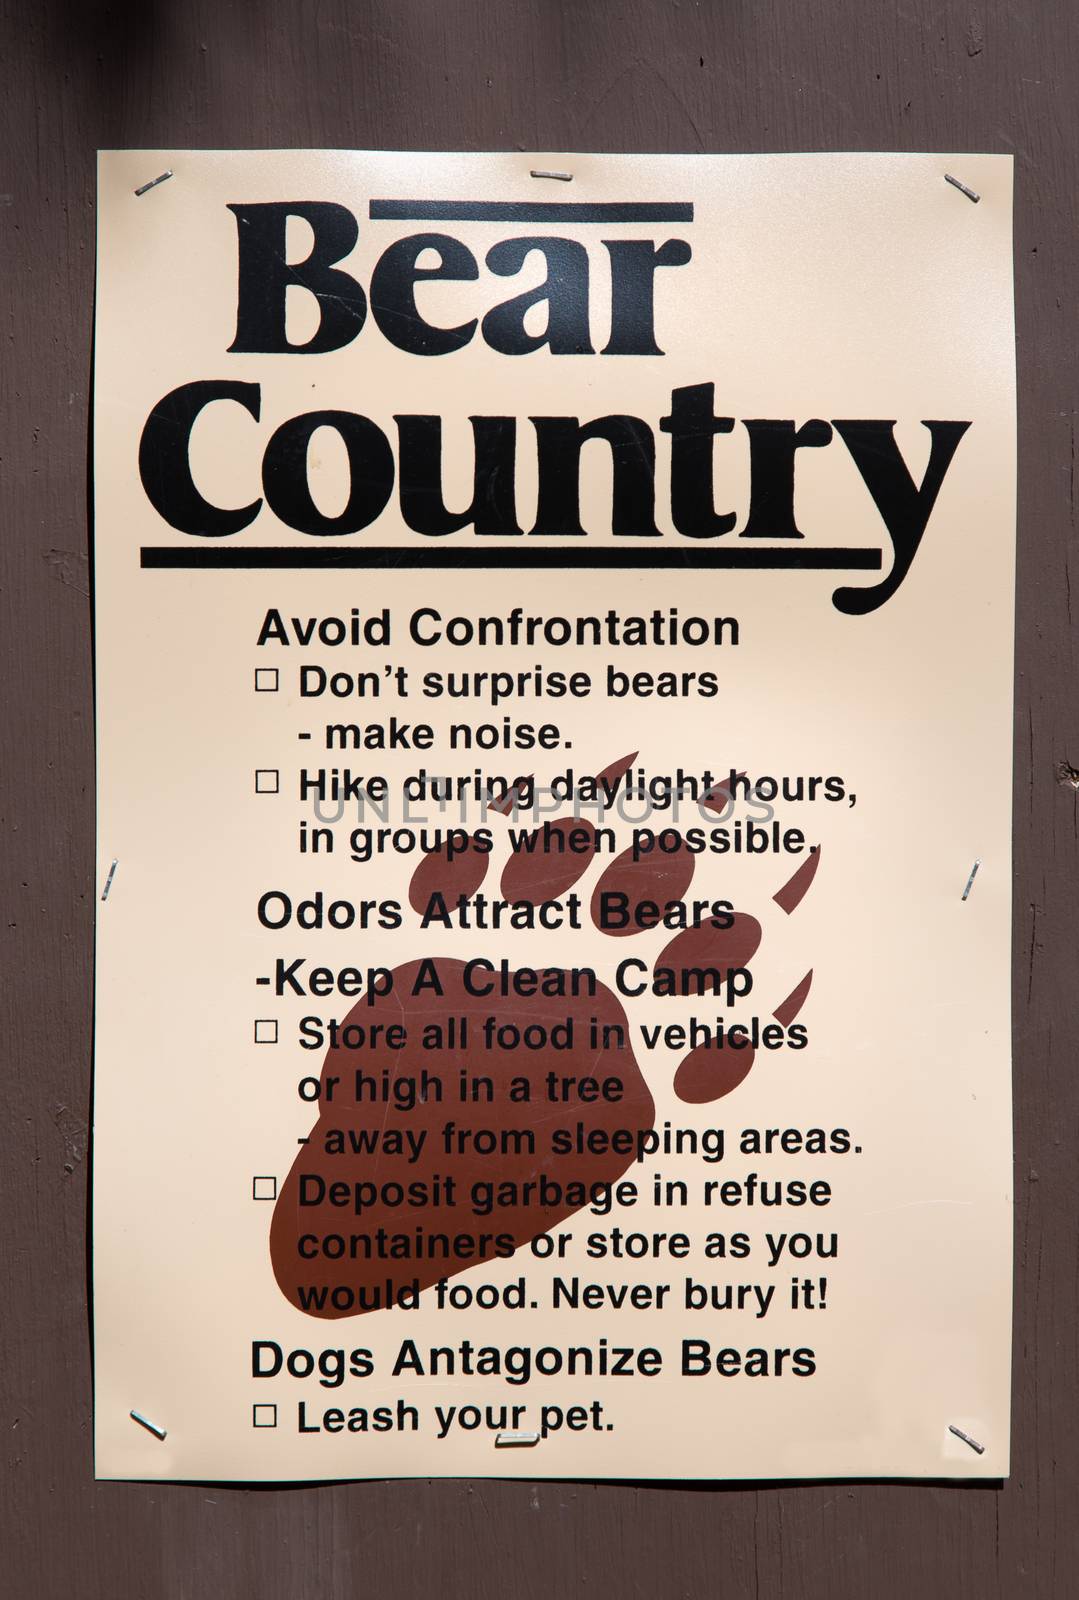 Sign in forest warns campers and hikers of bears.